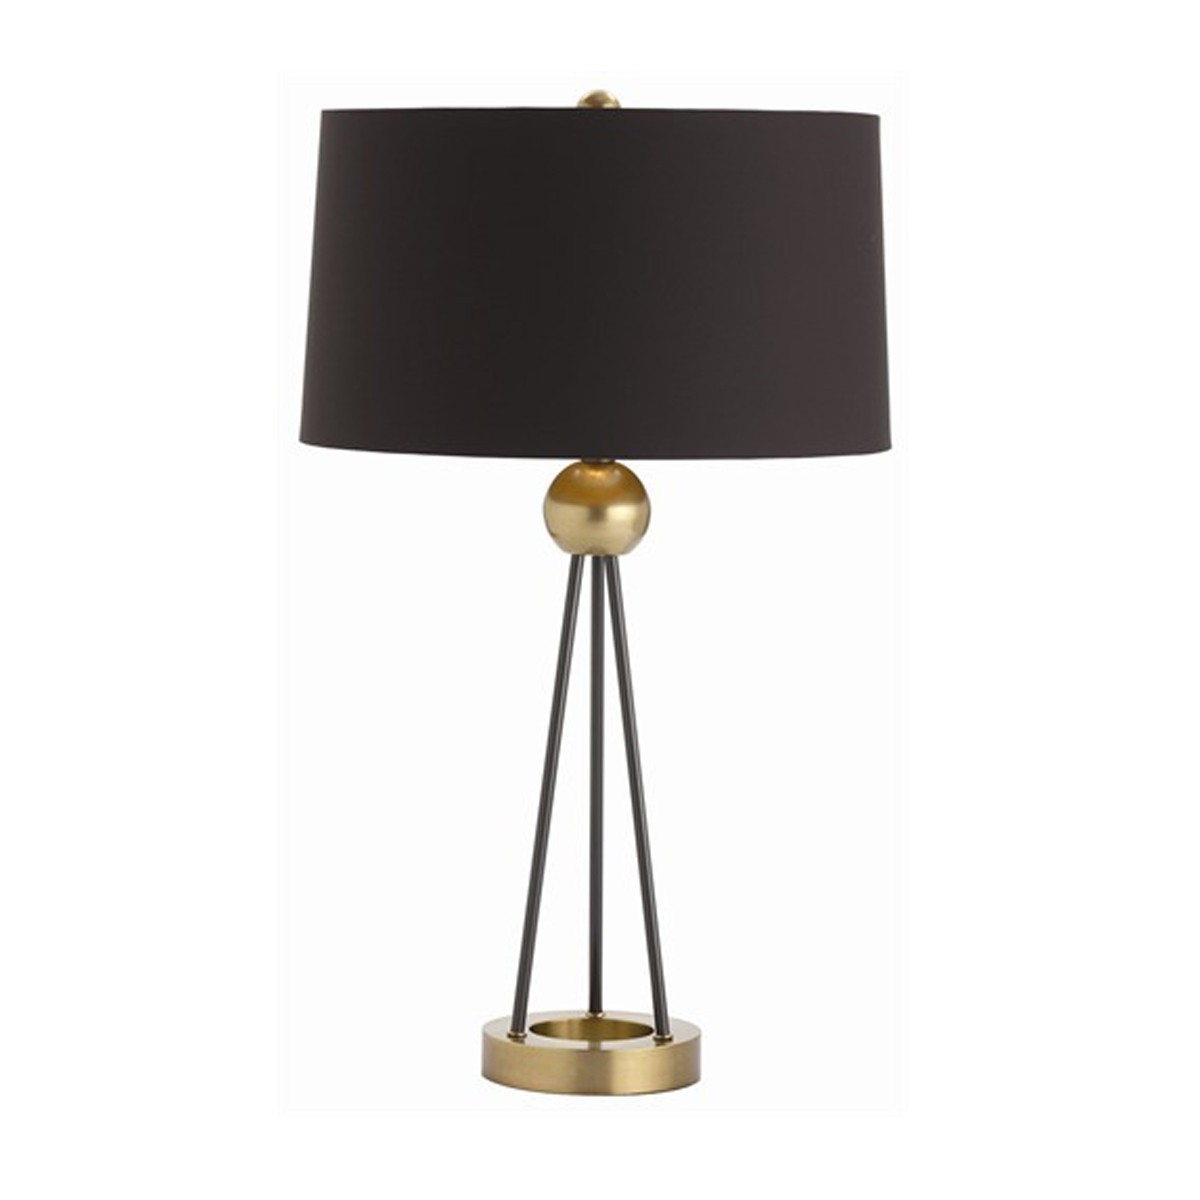 Lama Table Lamp - Contemporary Iron with Three Black Rods